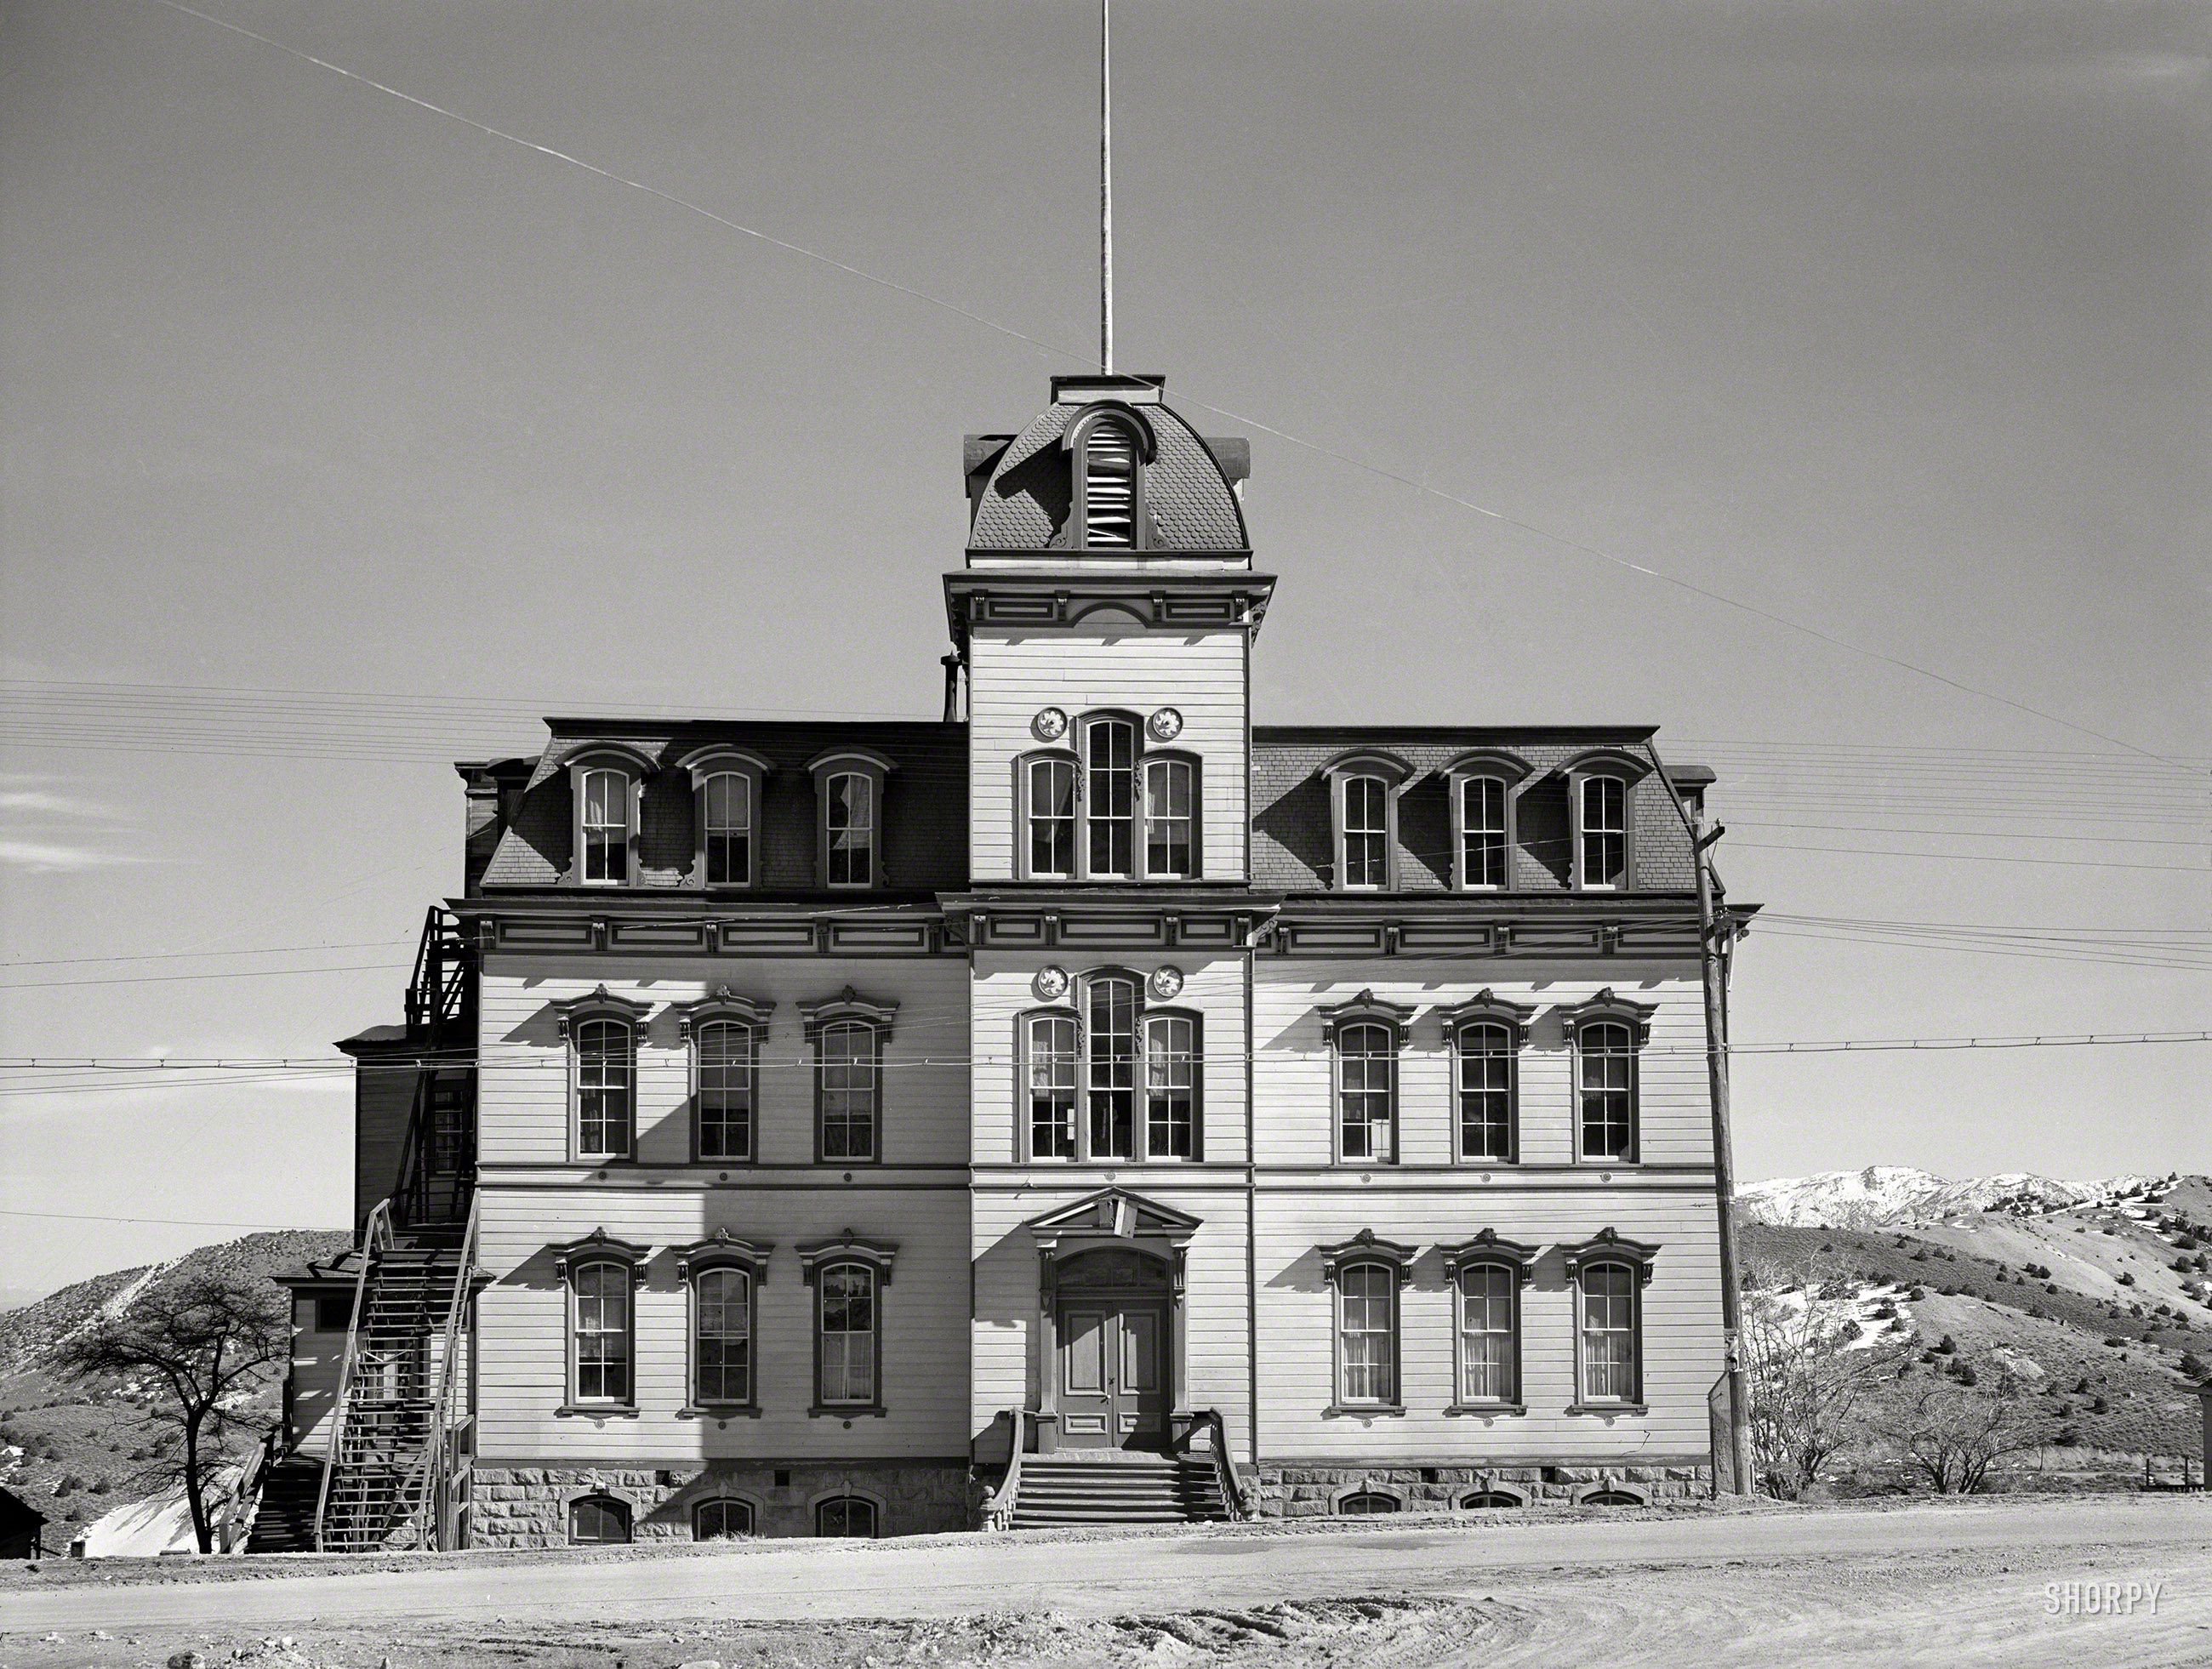 &nbsp; &nbsp; &nbsp; &nbsp; The last remaining Second Empire schoolhouse in the United States, the Fourth Ward School is now a museum.
March 1940. "Abandoned school. Virginia City, Nevada." Medium format negative by Arthur Rothstein for the Farm Security Administration. View full size.